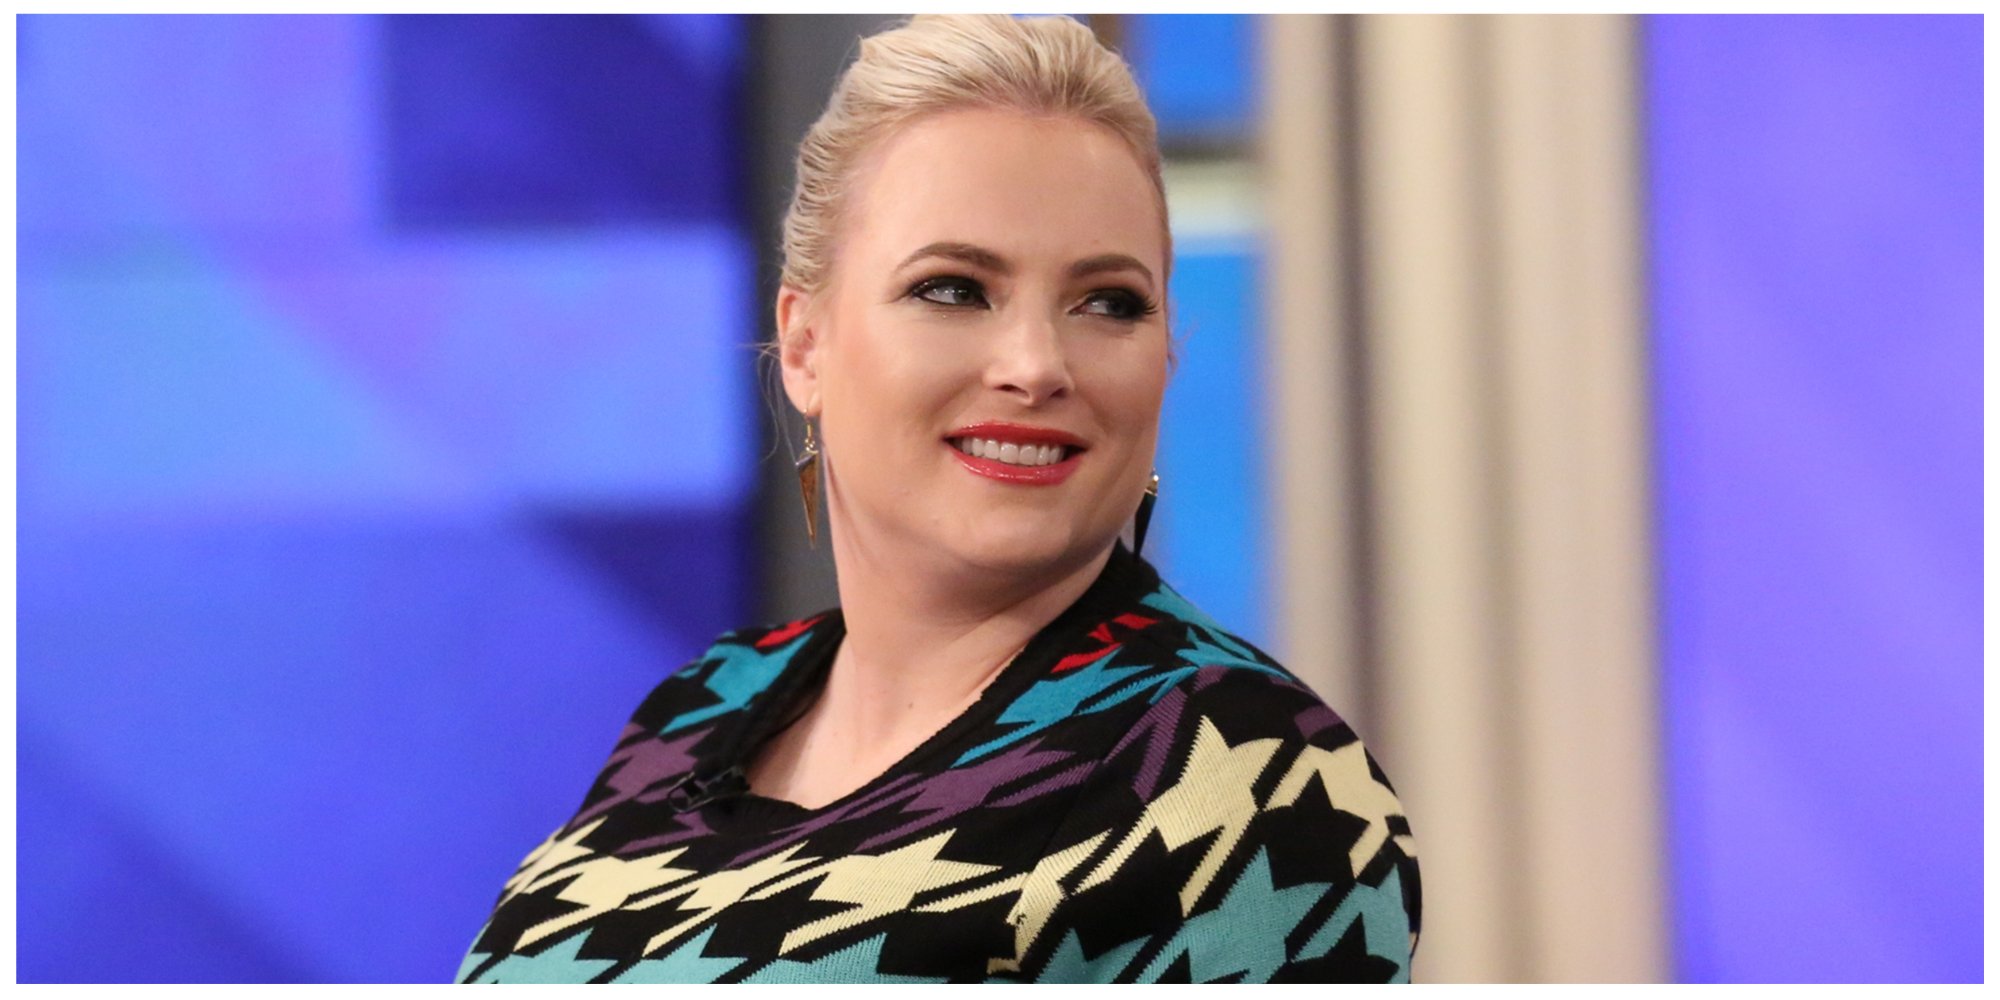 Meghan McCain on the set of ABC's 'The View' in 2019.